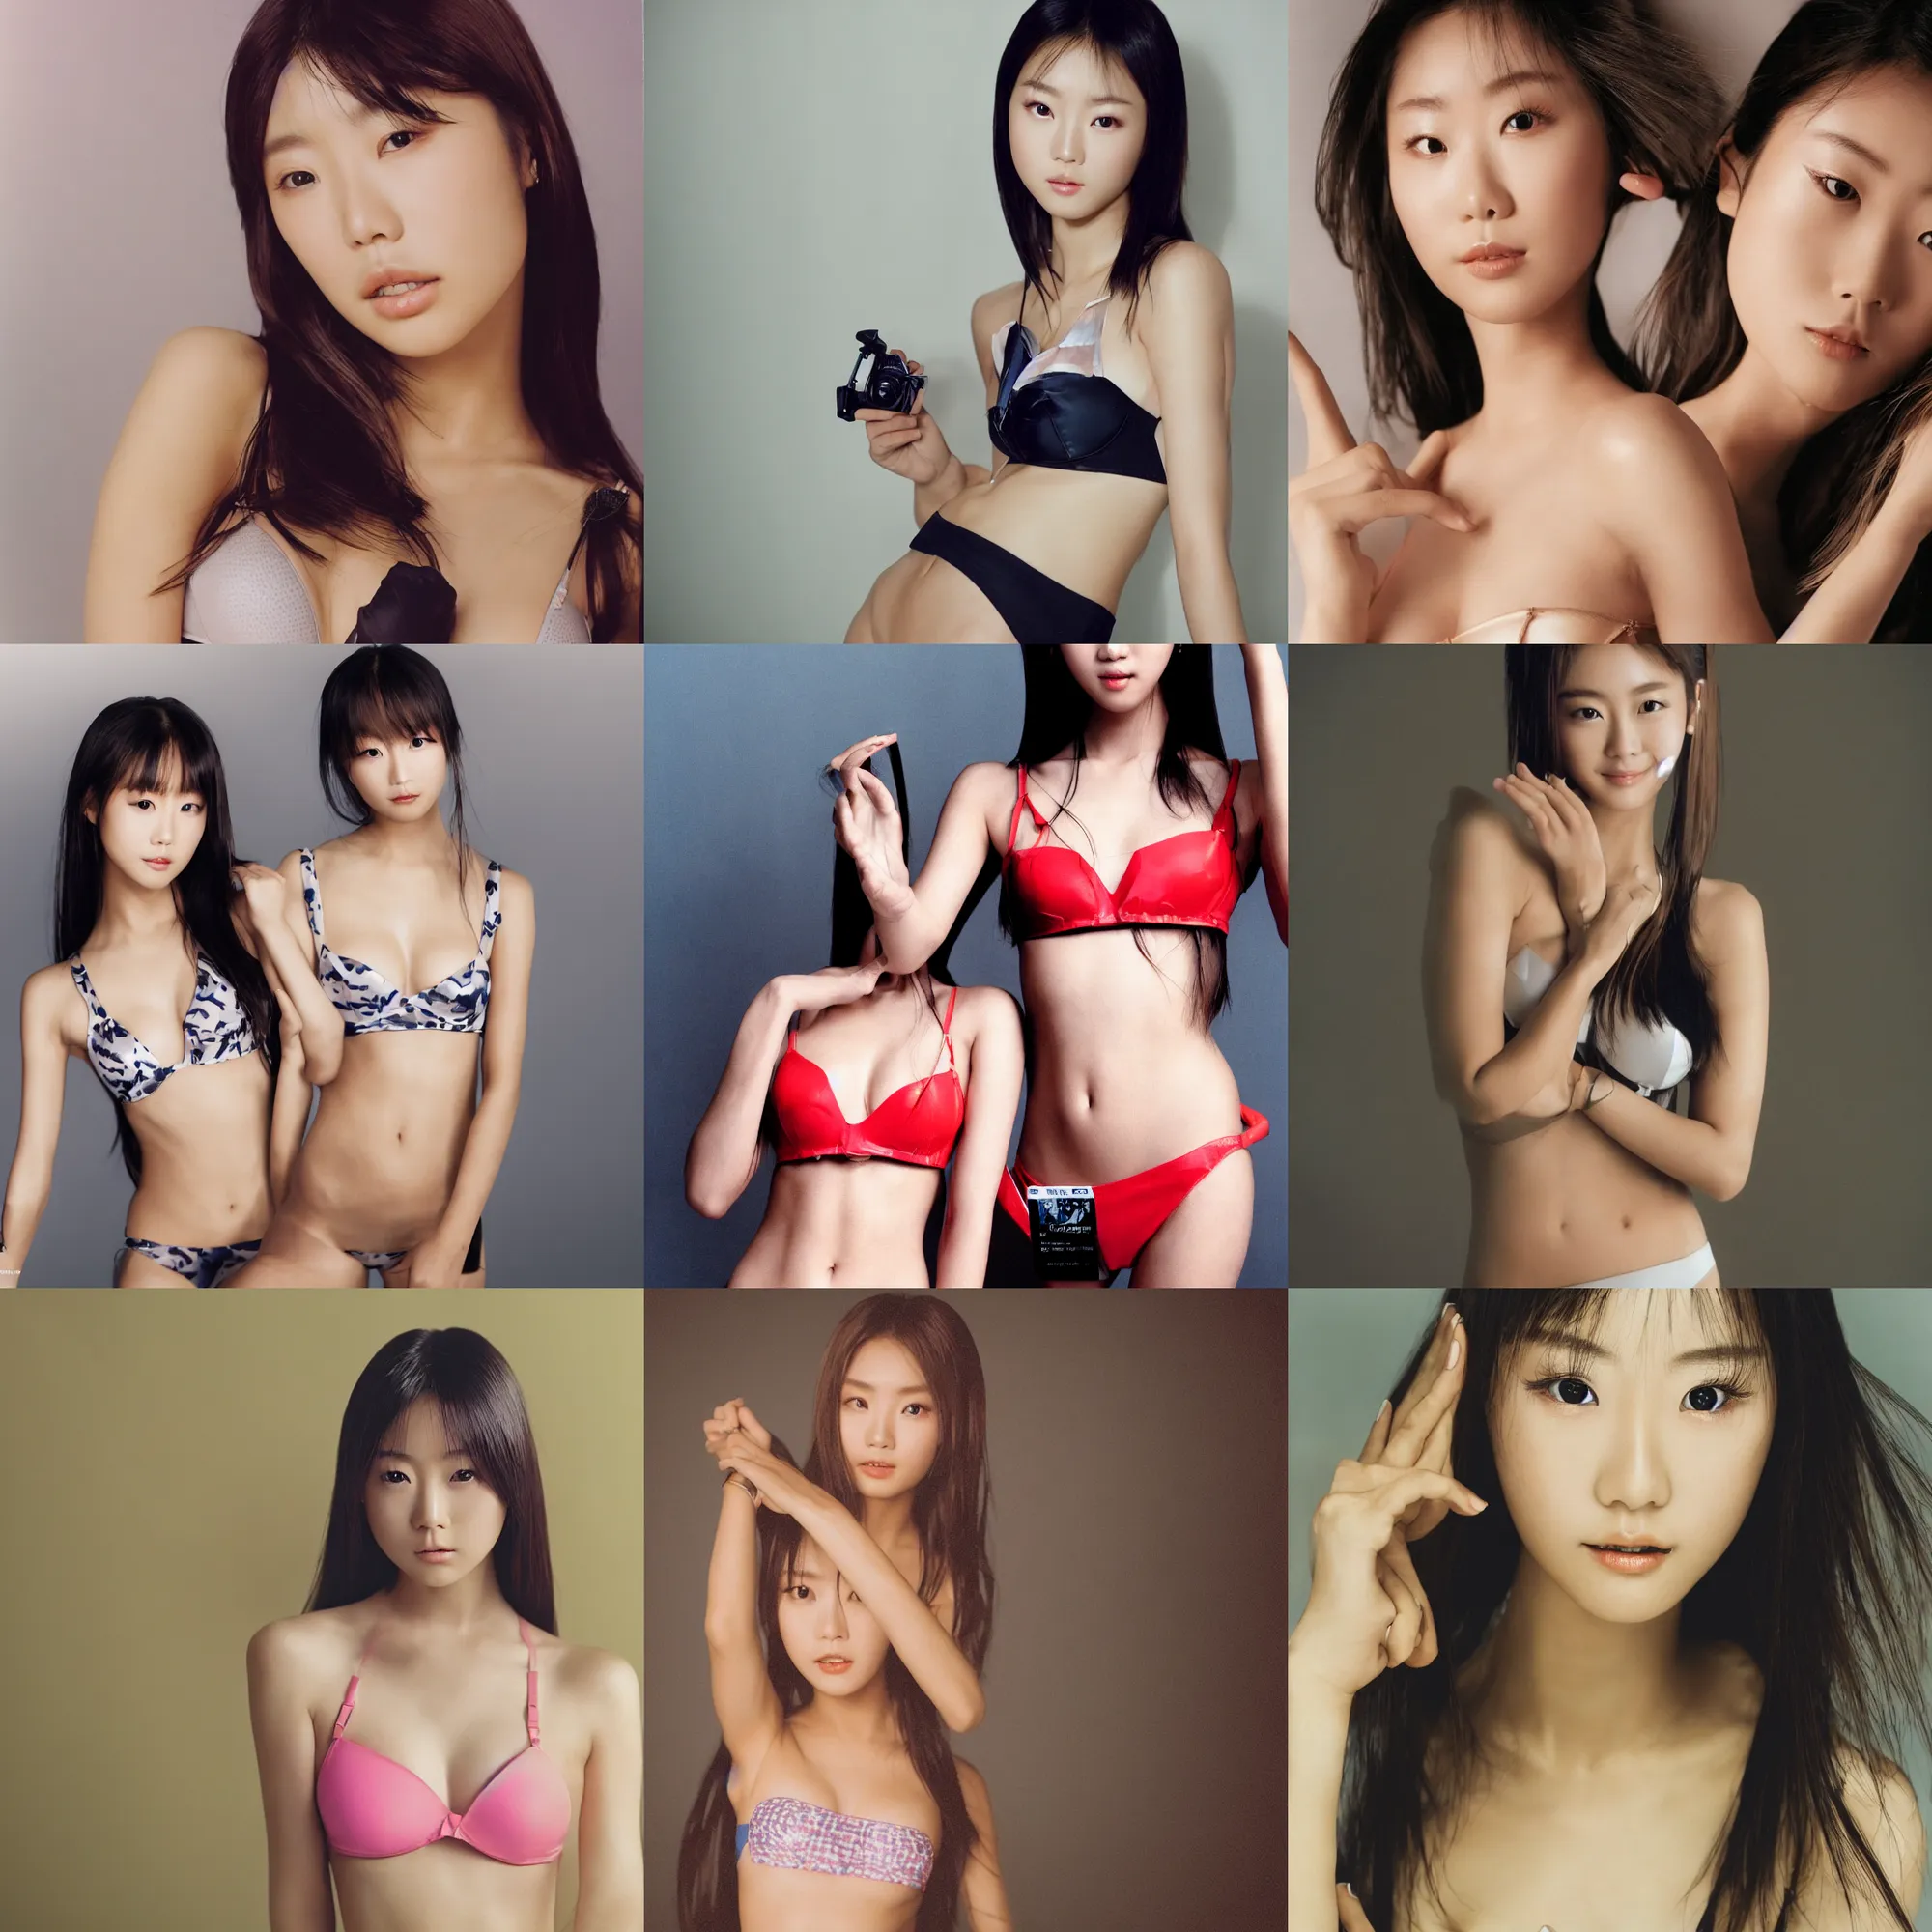 Prompt: Worksafe.2000s,8K HD incredible professional studio photo very close-up face of a young beautiful gorgeous cute Japanese actress supermodel J-Pop idol girl posing at luxury hall,wearing bikini bra.At Behance and Instagram,taken with polaroid kodak portra.Photoshop,Adobe Lightroom,After Effects